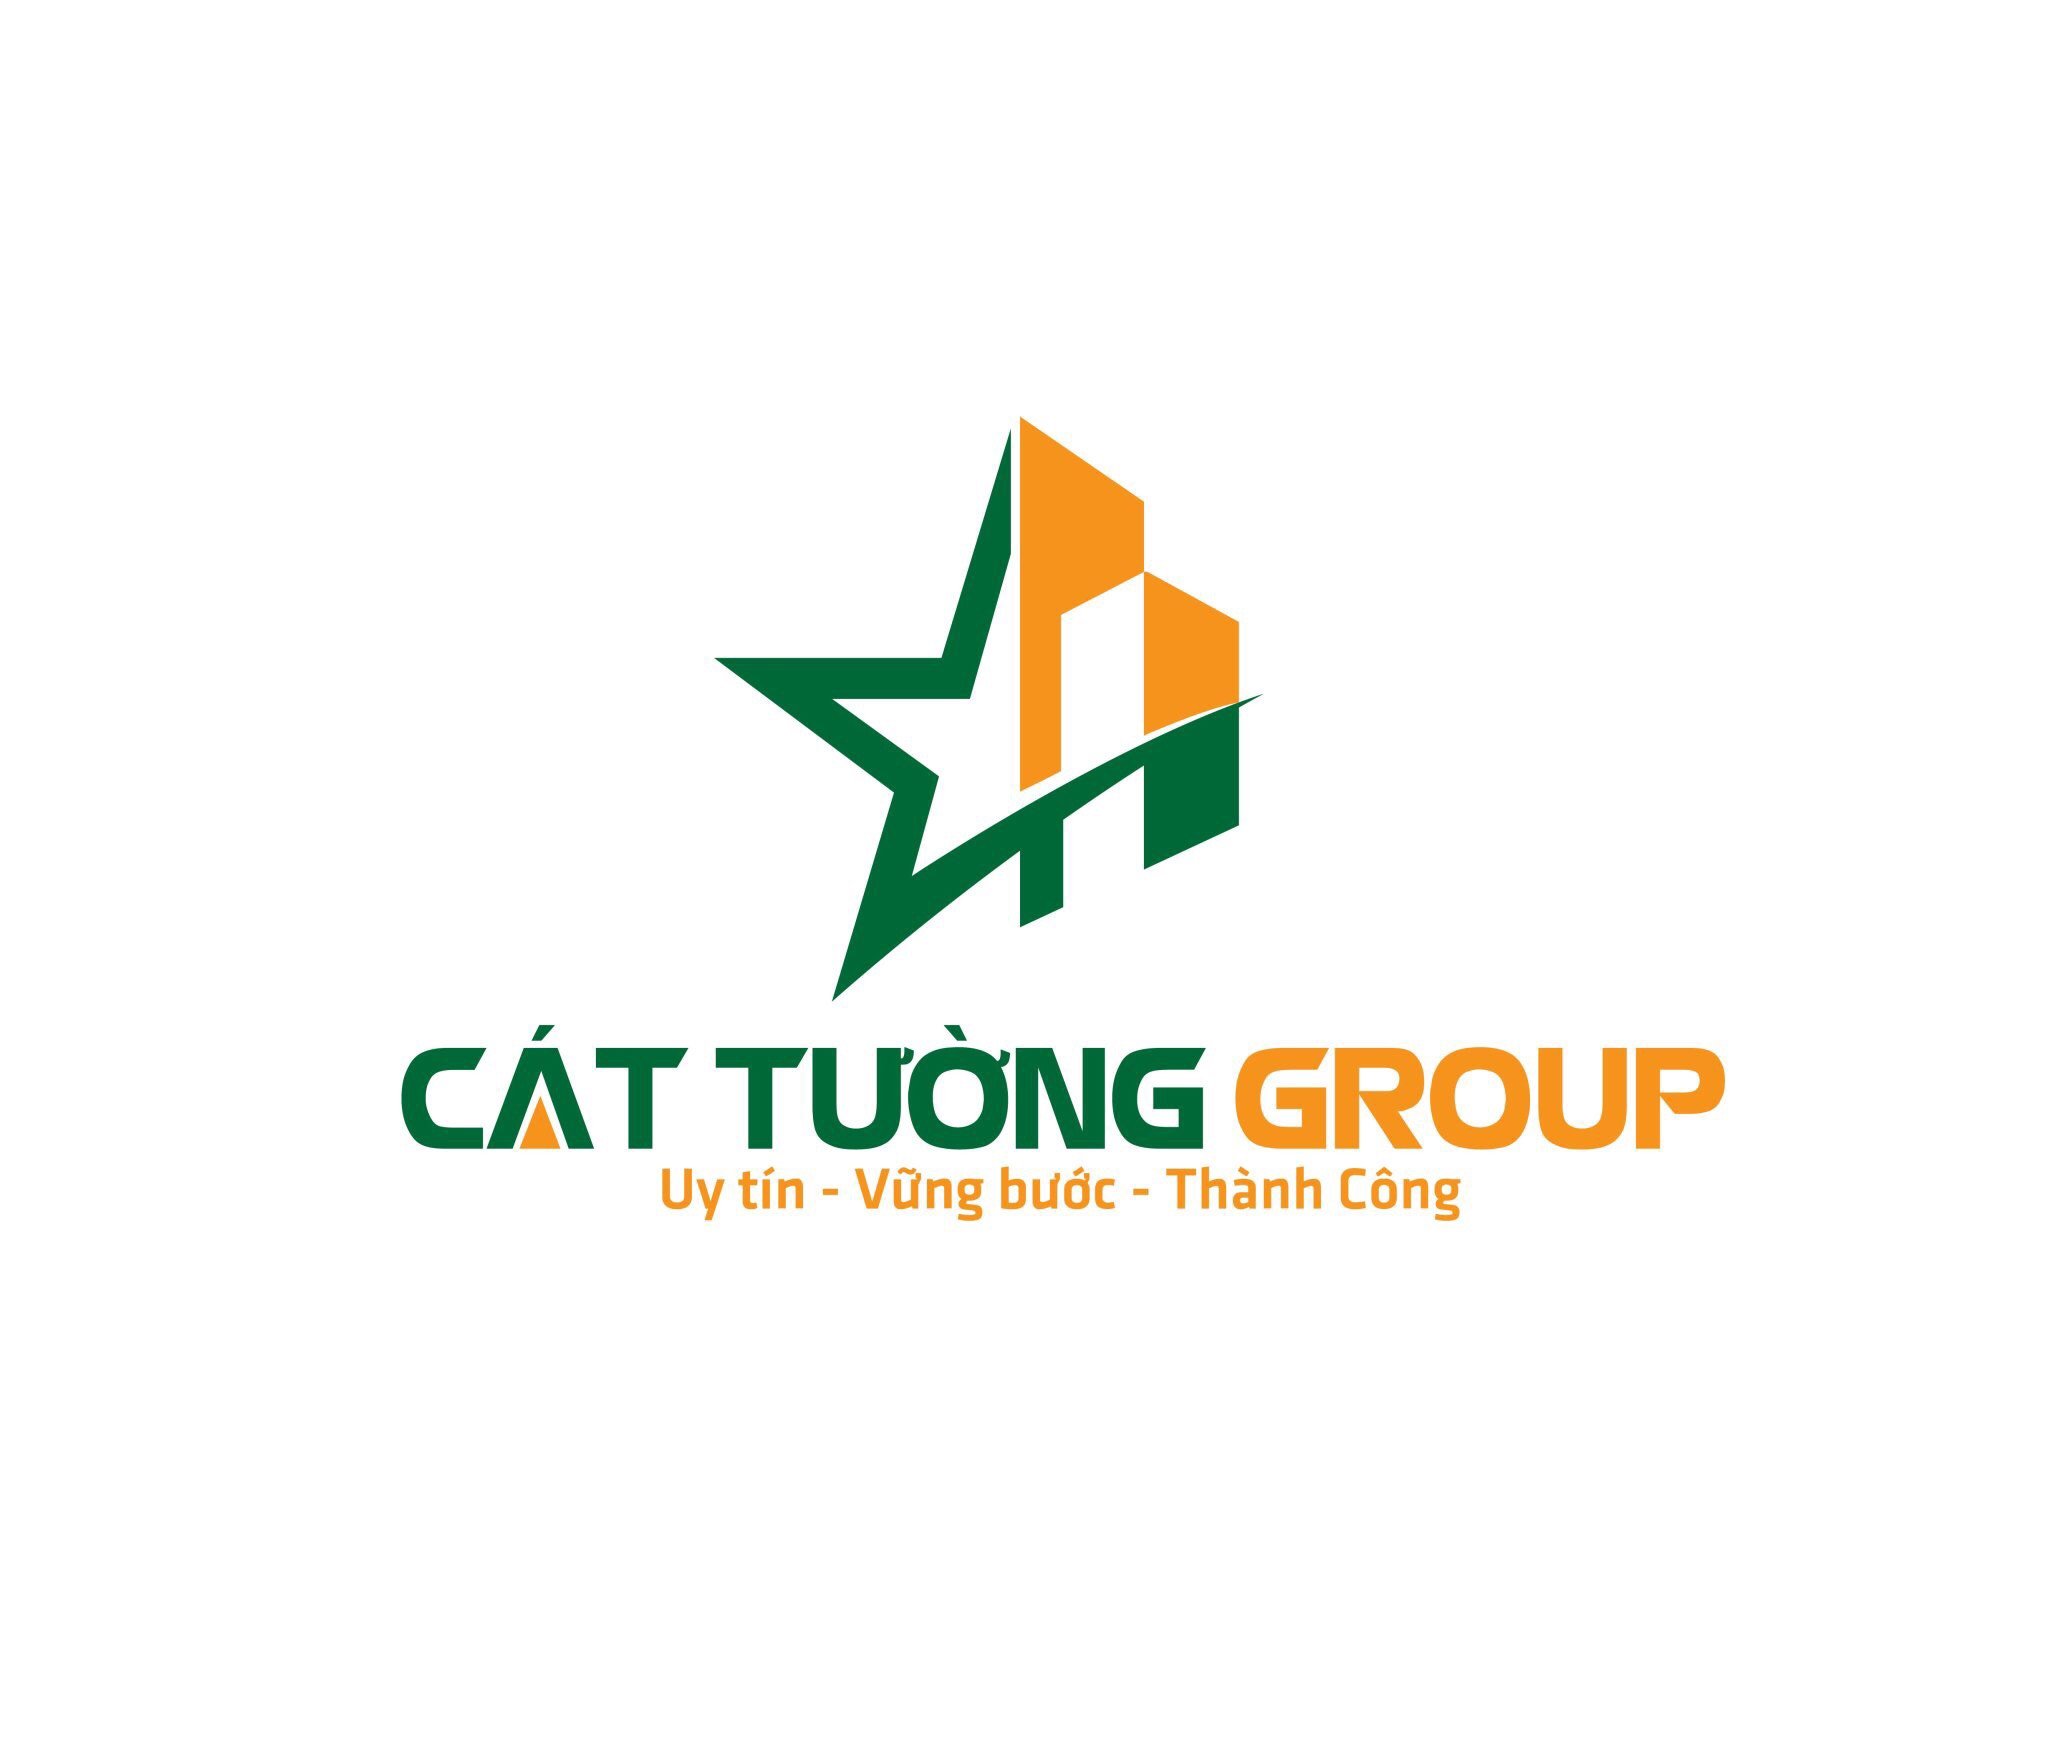 Cat Tuong Group